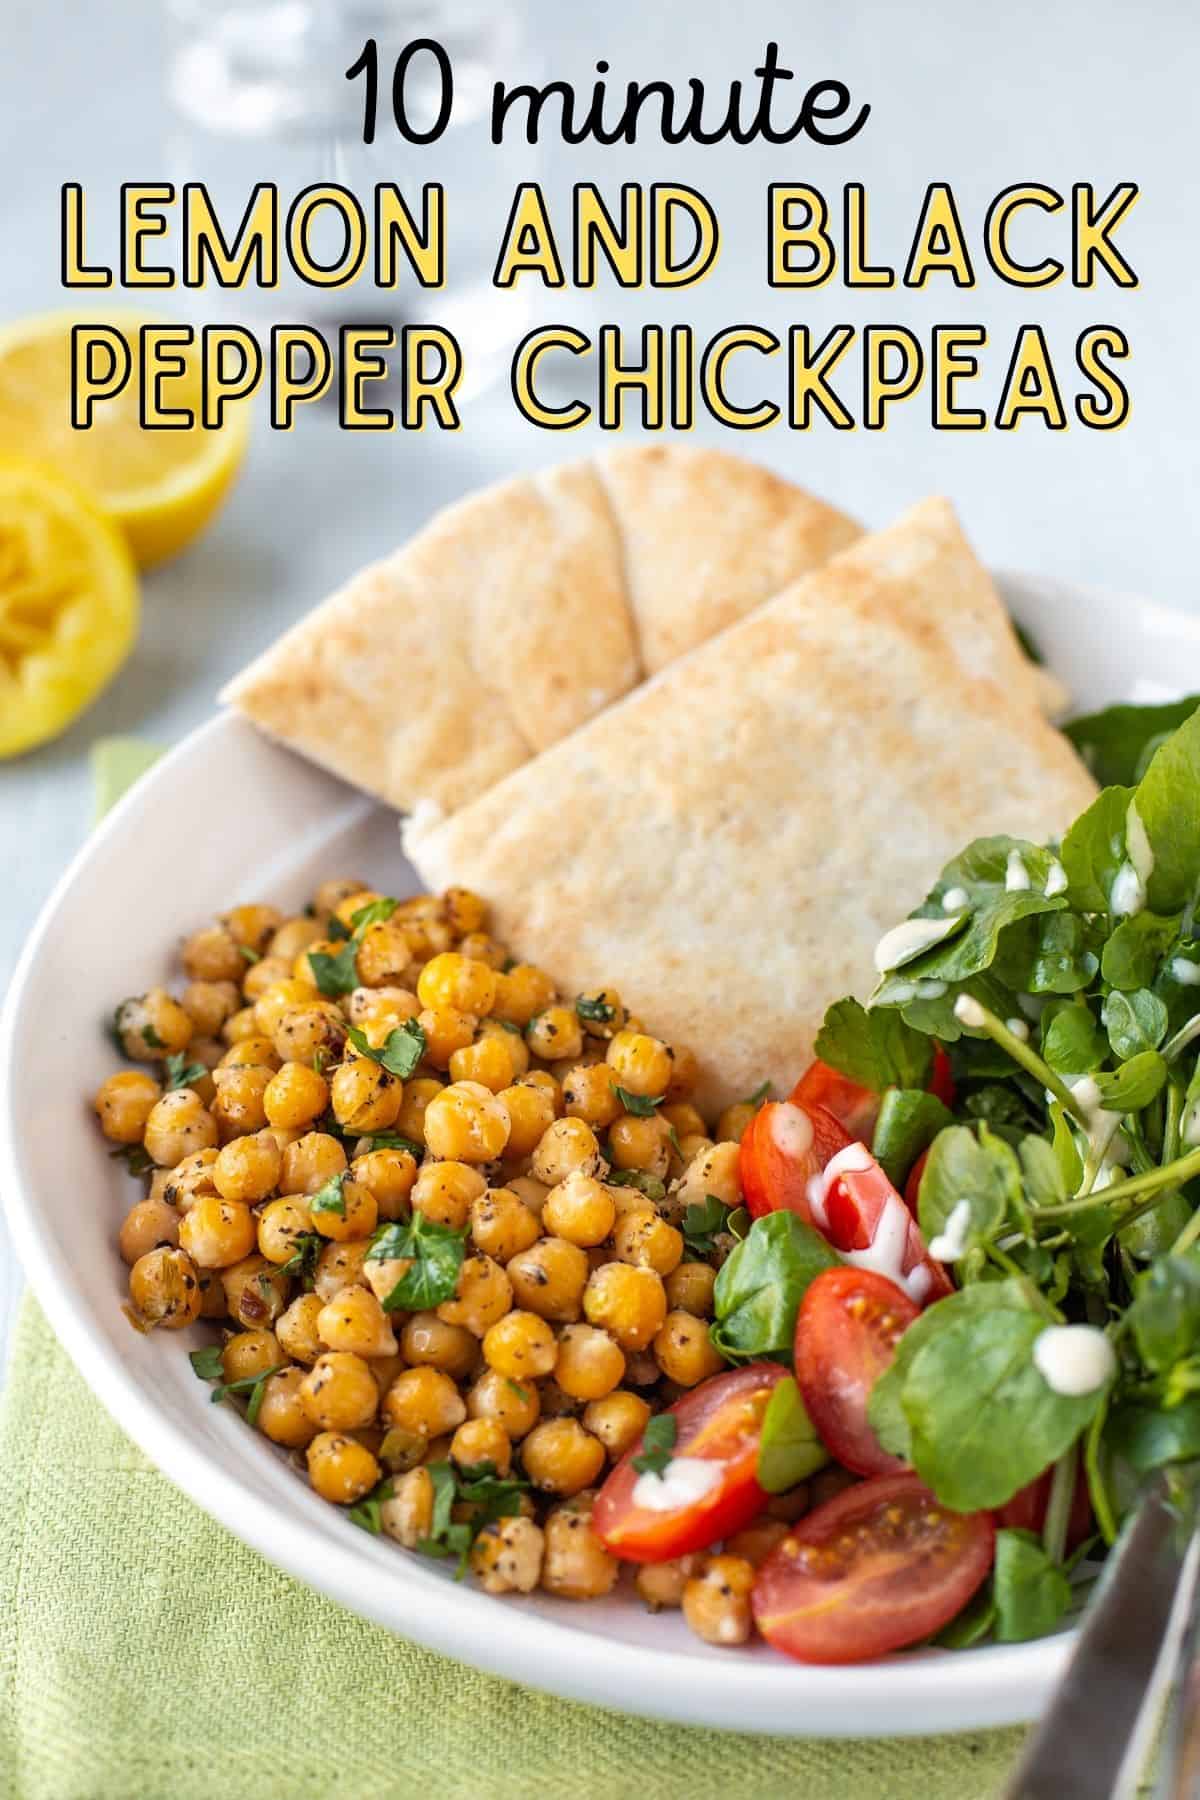 A portion of lemon and black pepper chickpeas in a bowl with salad leaves and pitta bread.